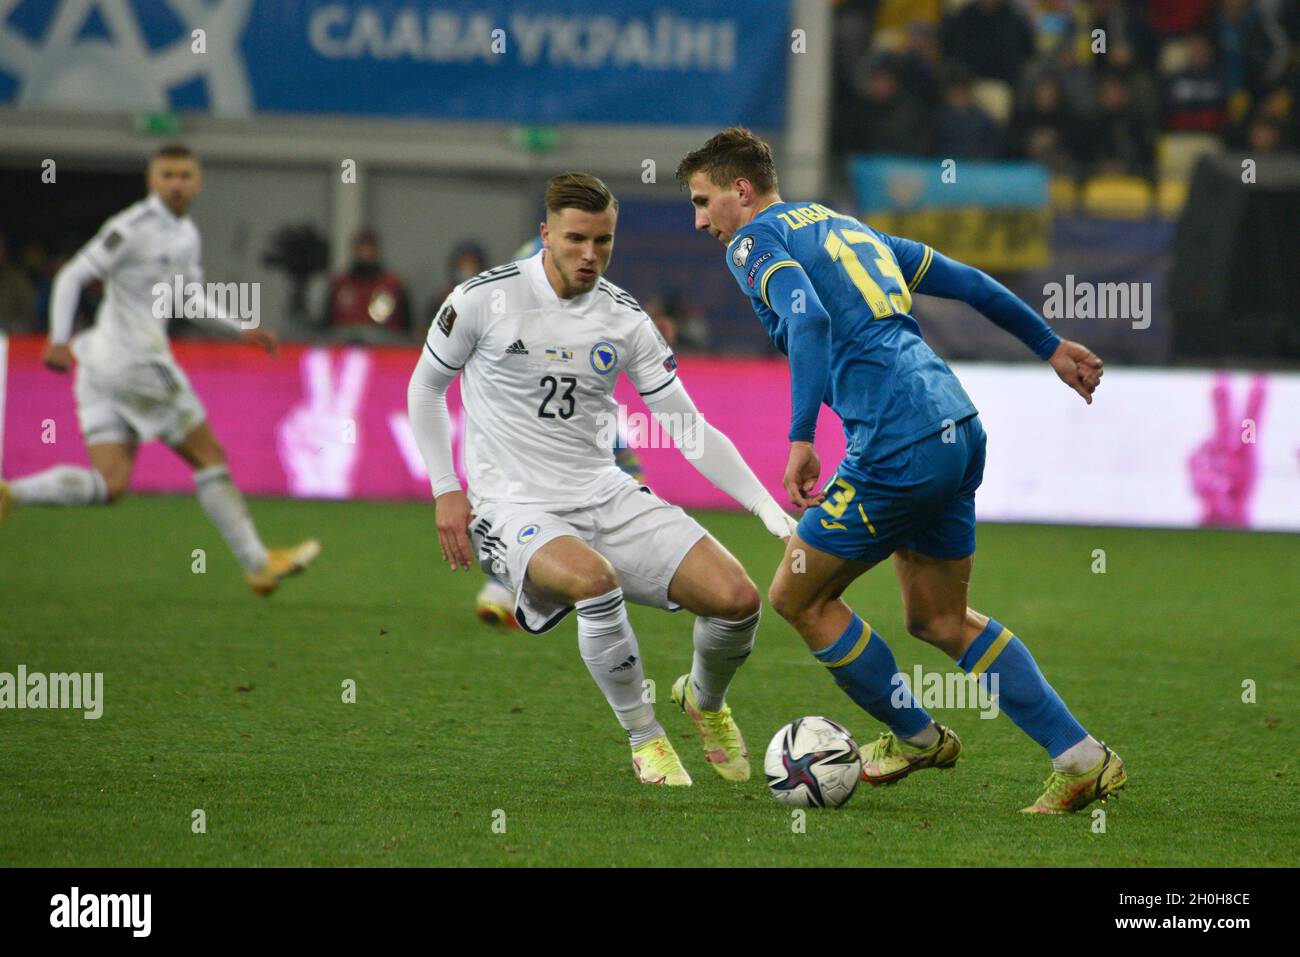 LVIV, UKRAINE - OCTOBER 12, 2021 - Players of the national team of Ukraine Illya Zabarnyi (R) and Bosnia and Herzegovina Ermedin Demirovic fight for the ball during the 2022 FIFA World Cup qualifying matchday 8 game which ended in a draw 1:1, Lviv, western Ukraine Stock Photo